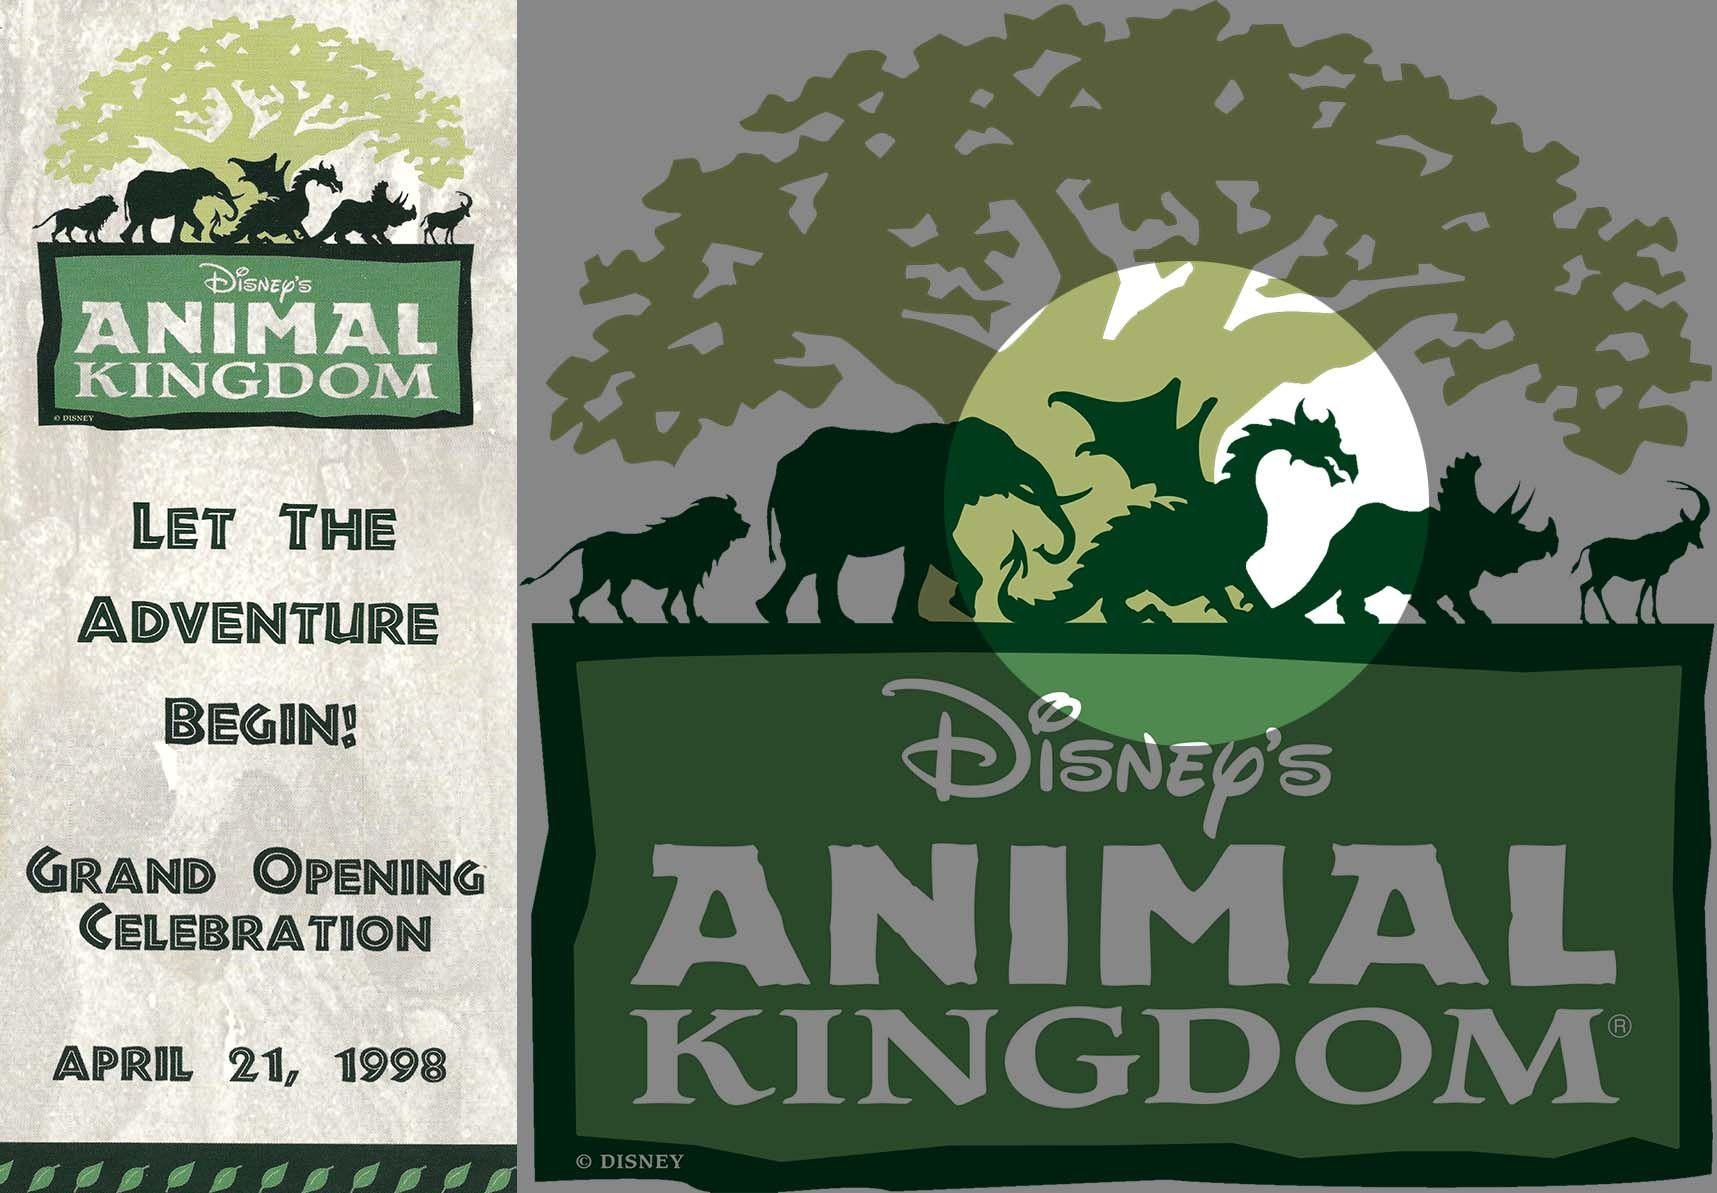 Animal Kingdom Logo - Beastly Kingdom, The Dragon and Other Survivors - Discovery Riverboats